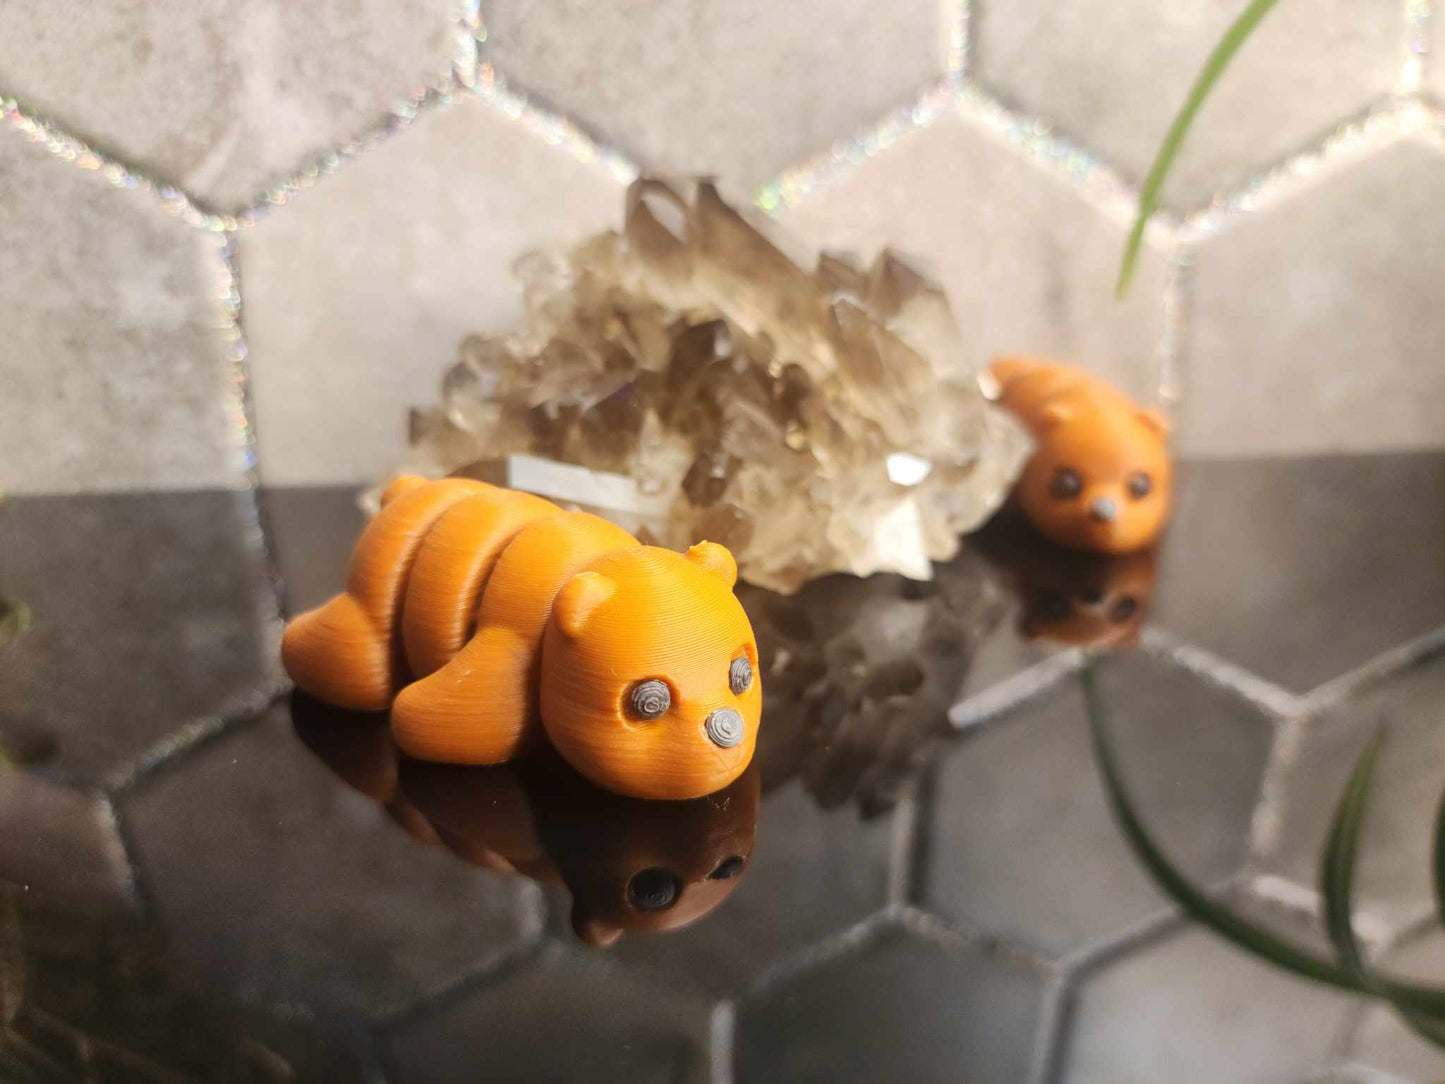 3D Printed Critter